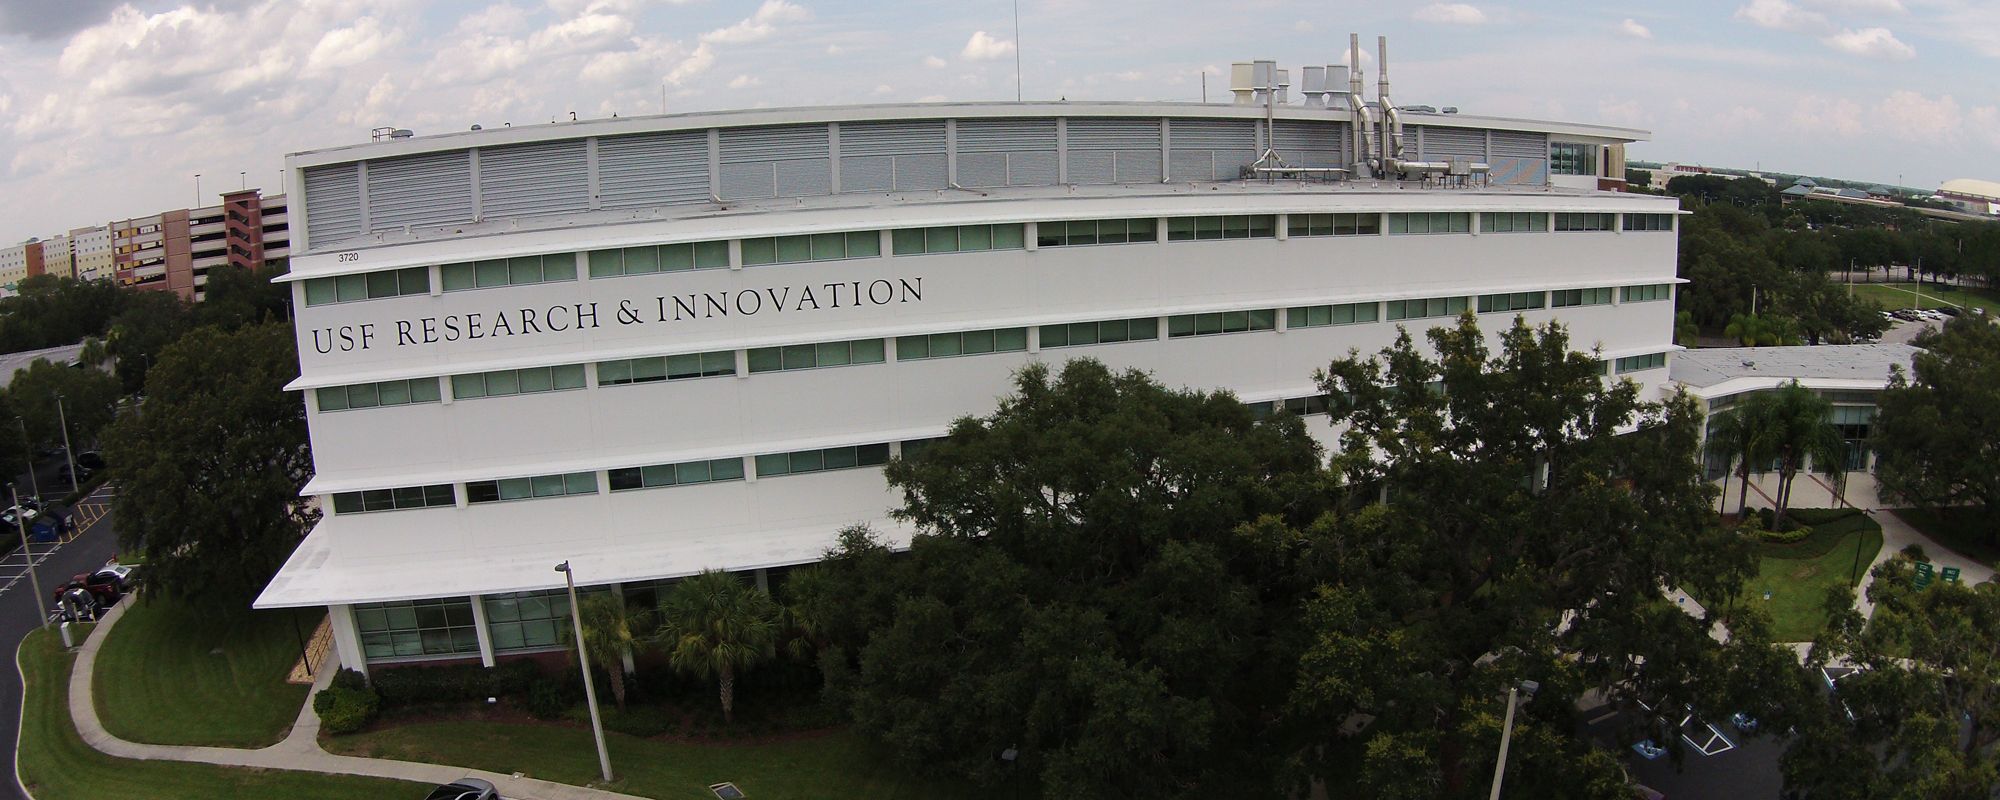 USF Research and Innovation